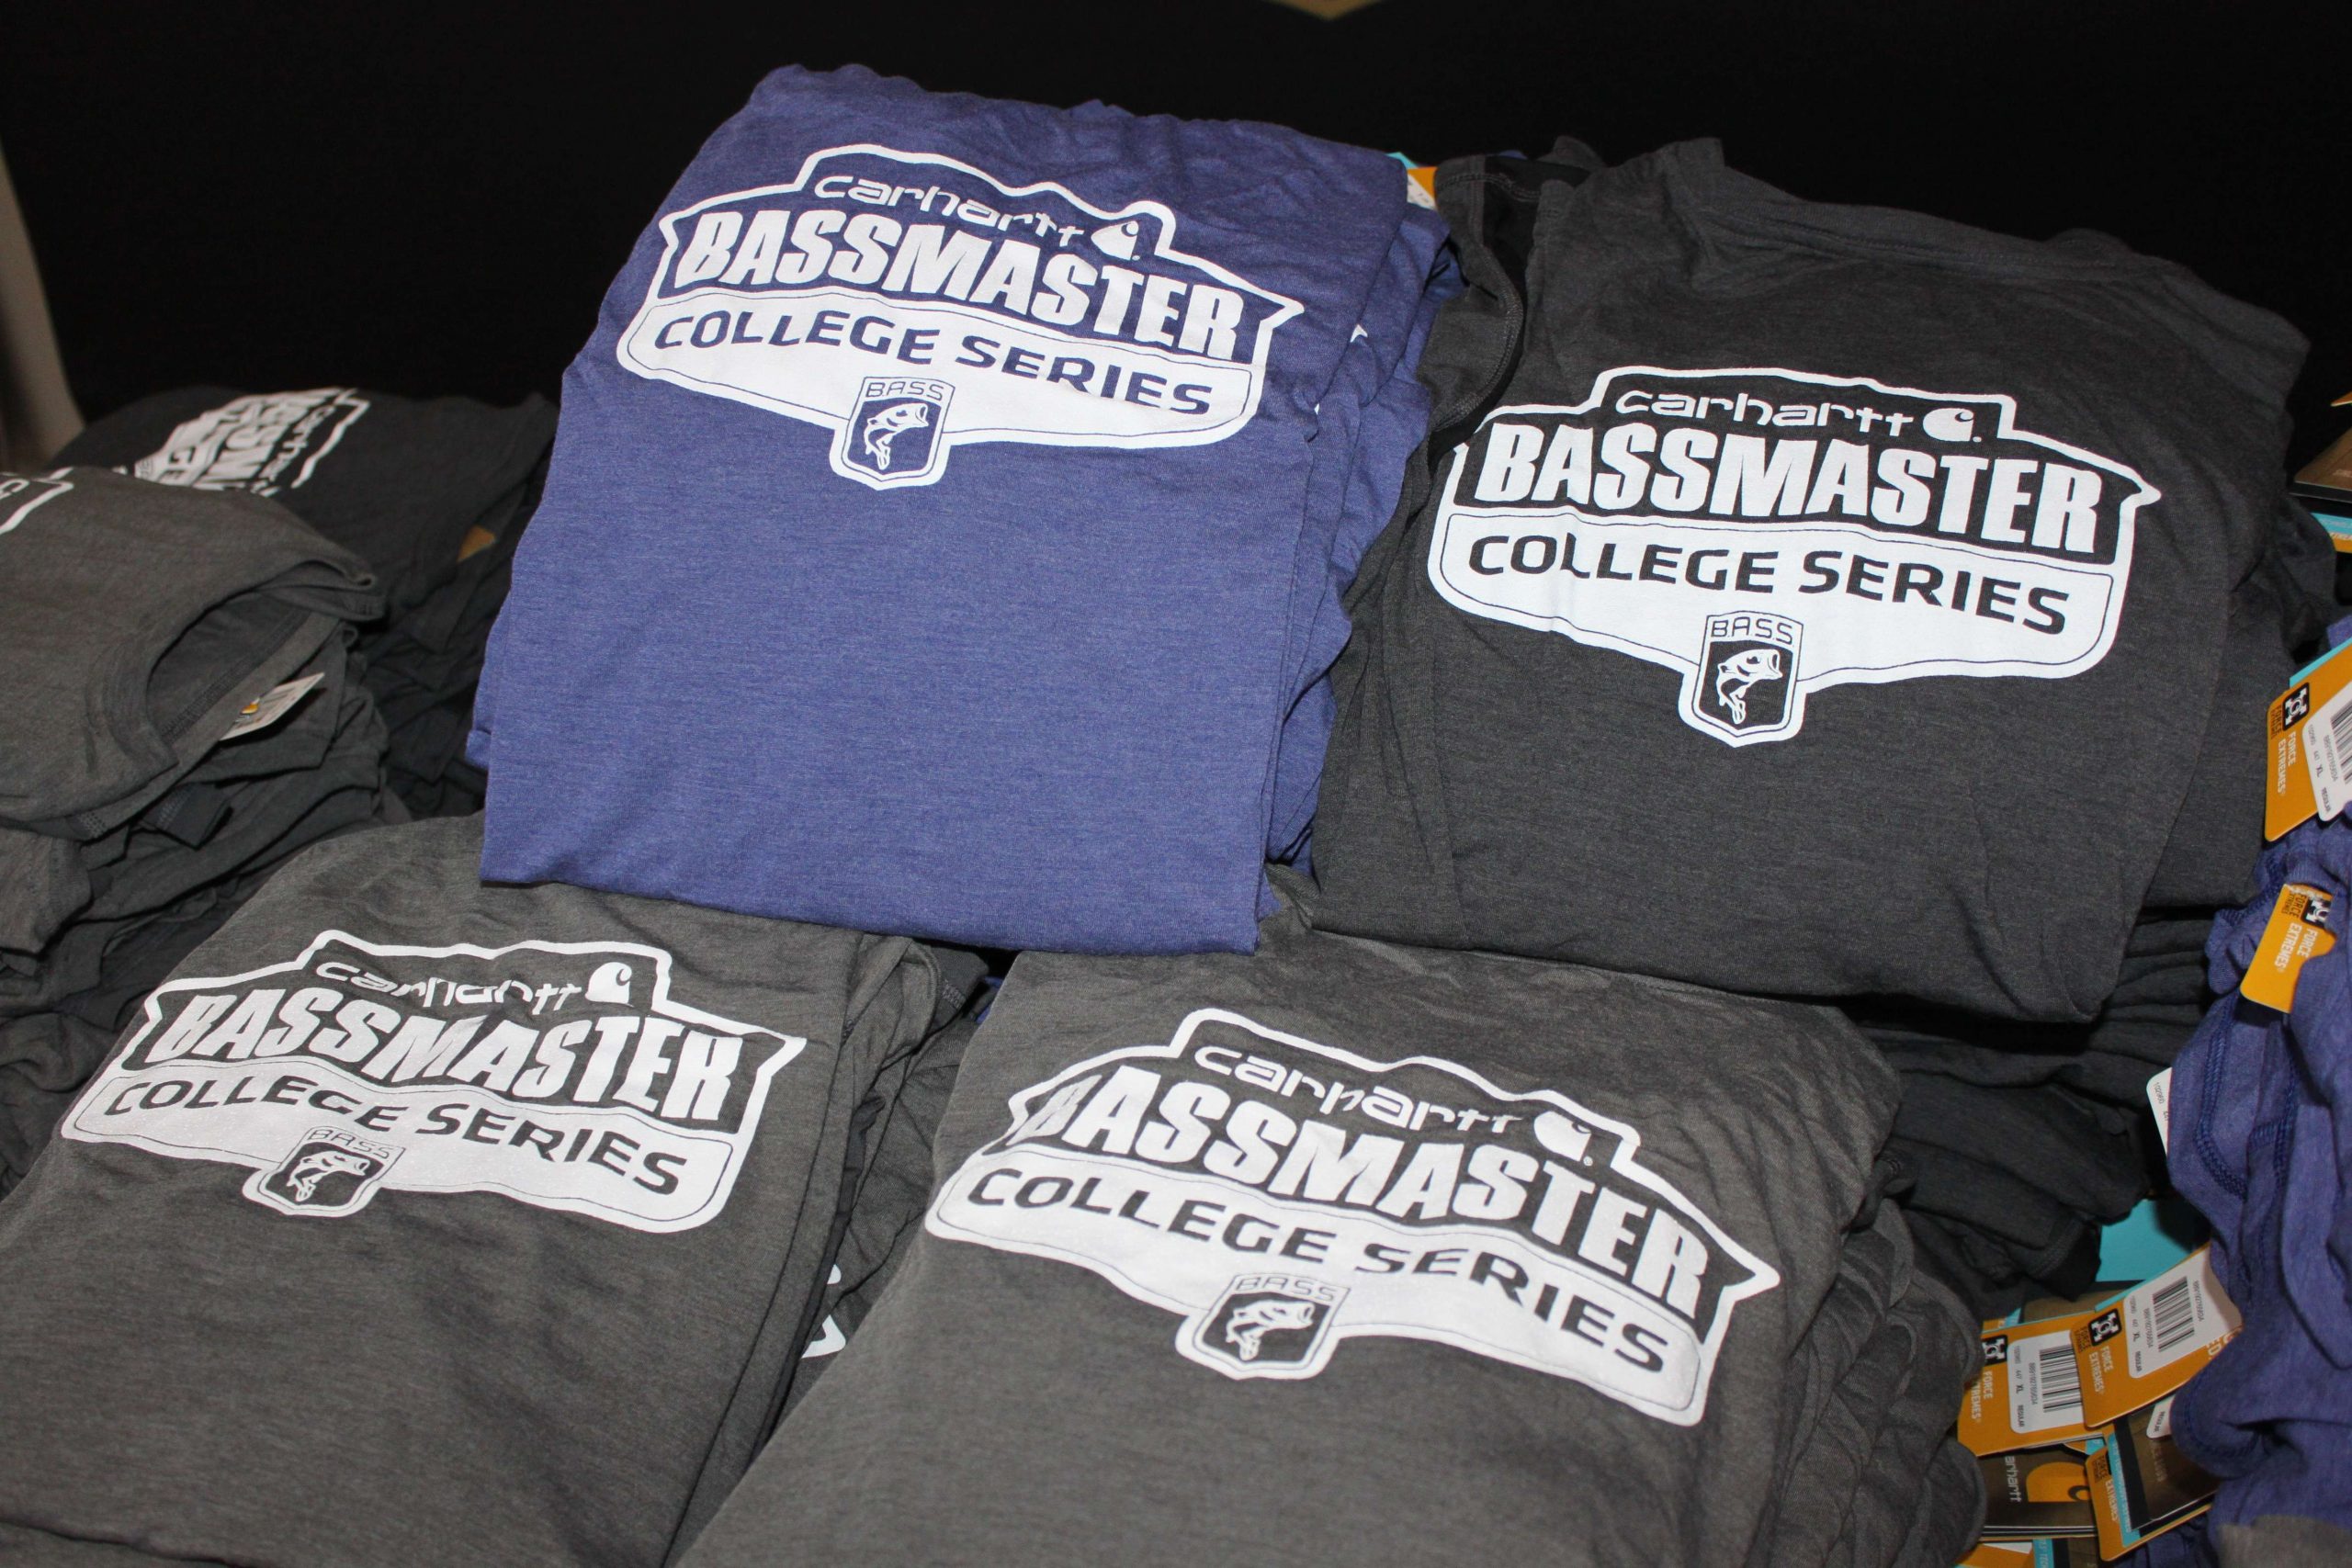 But to reach the championship, teams will need a good showing here on Lake Cherokee. They surely will look good doing it, as the tourâs many sponsors showed up in force with more swag than you can shake a fishing rod at, for sure. Here are some handsome T-shirts with the Carhartt Bassmaster College Series logo.